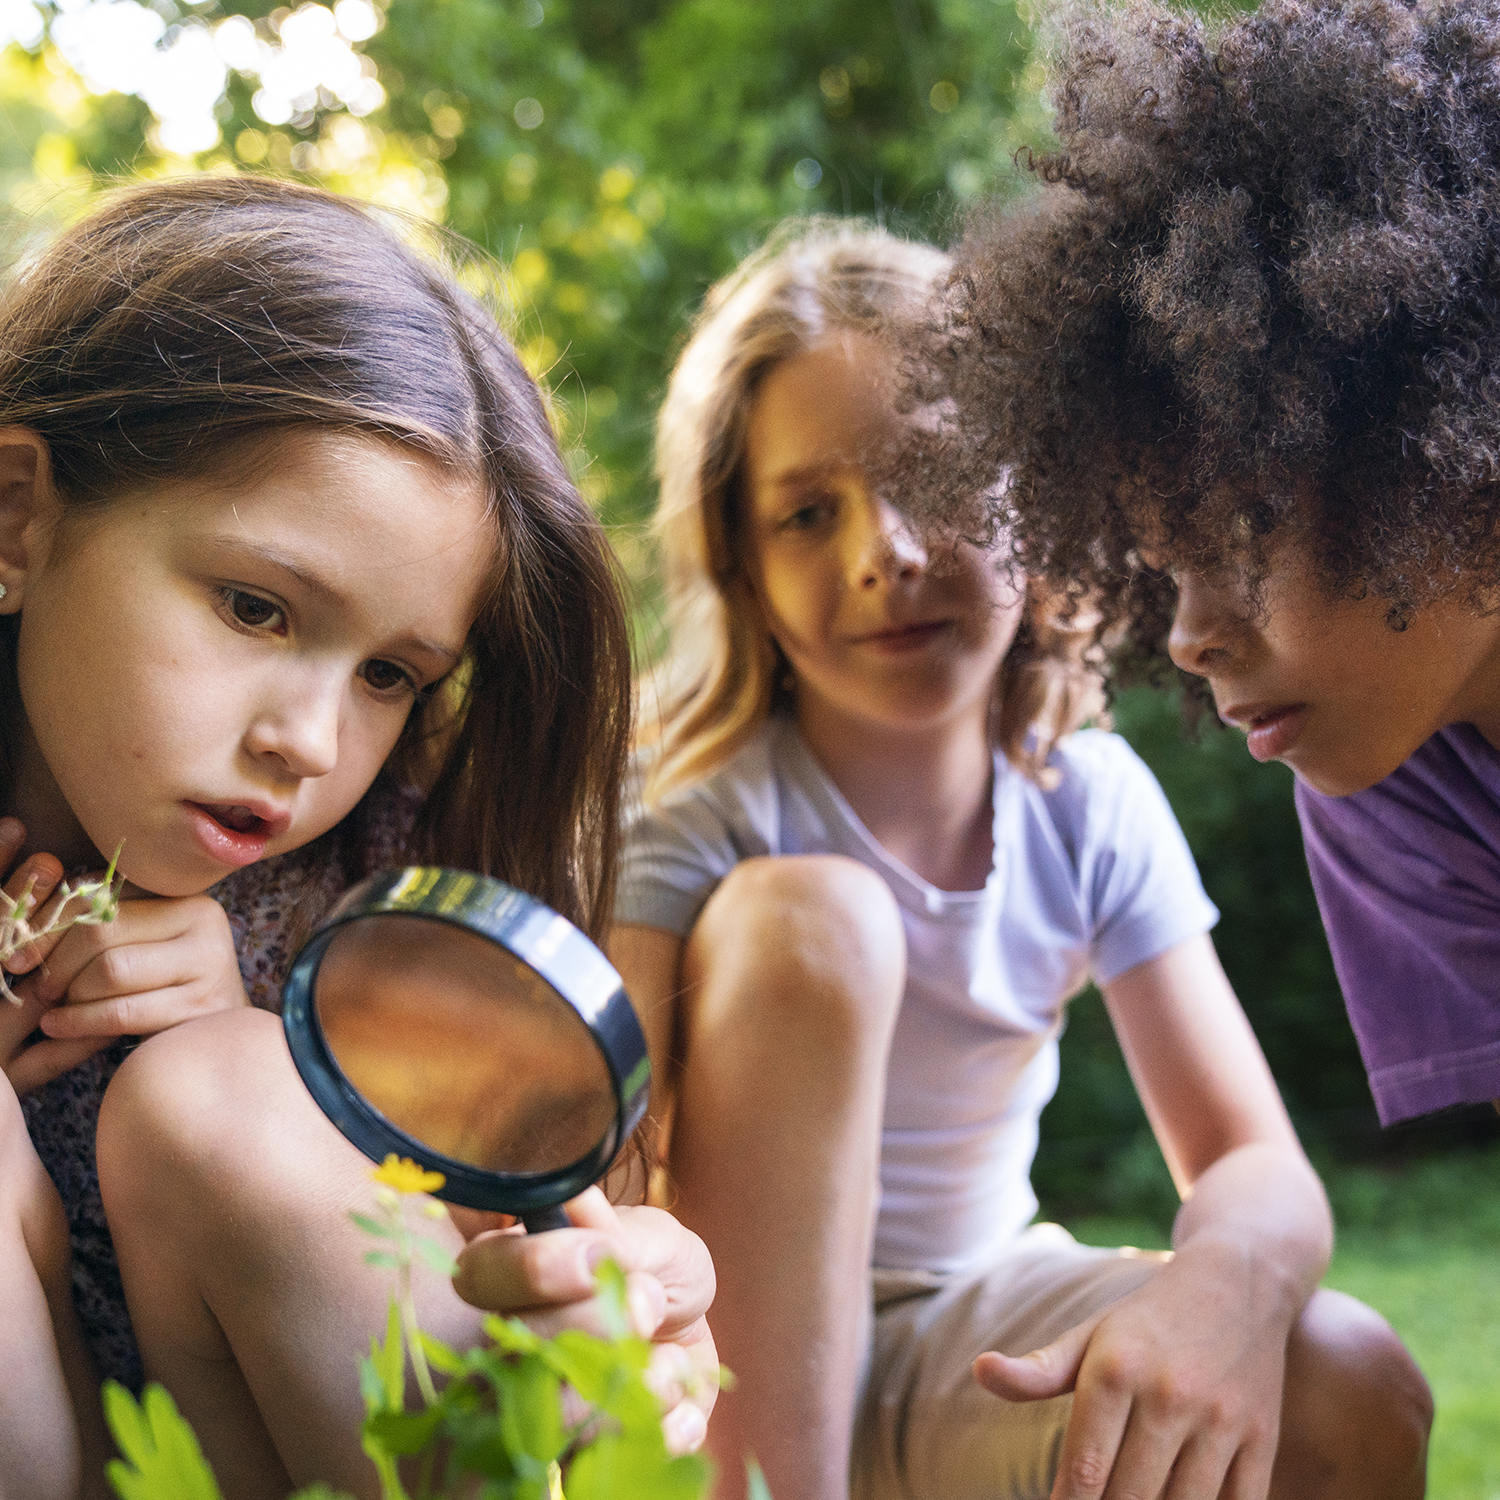 Kids looking at nature with a magnifying glass